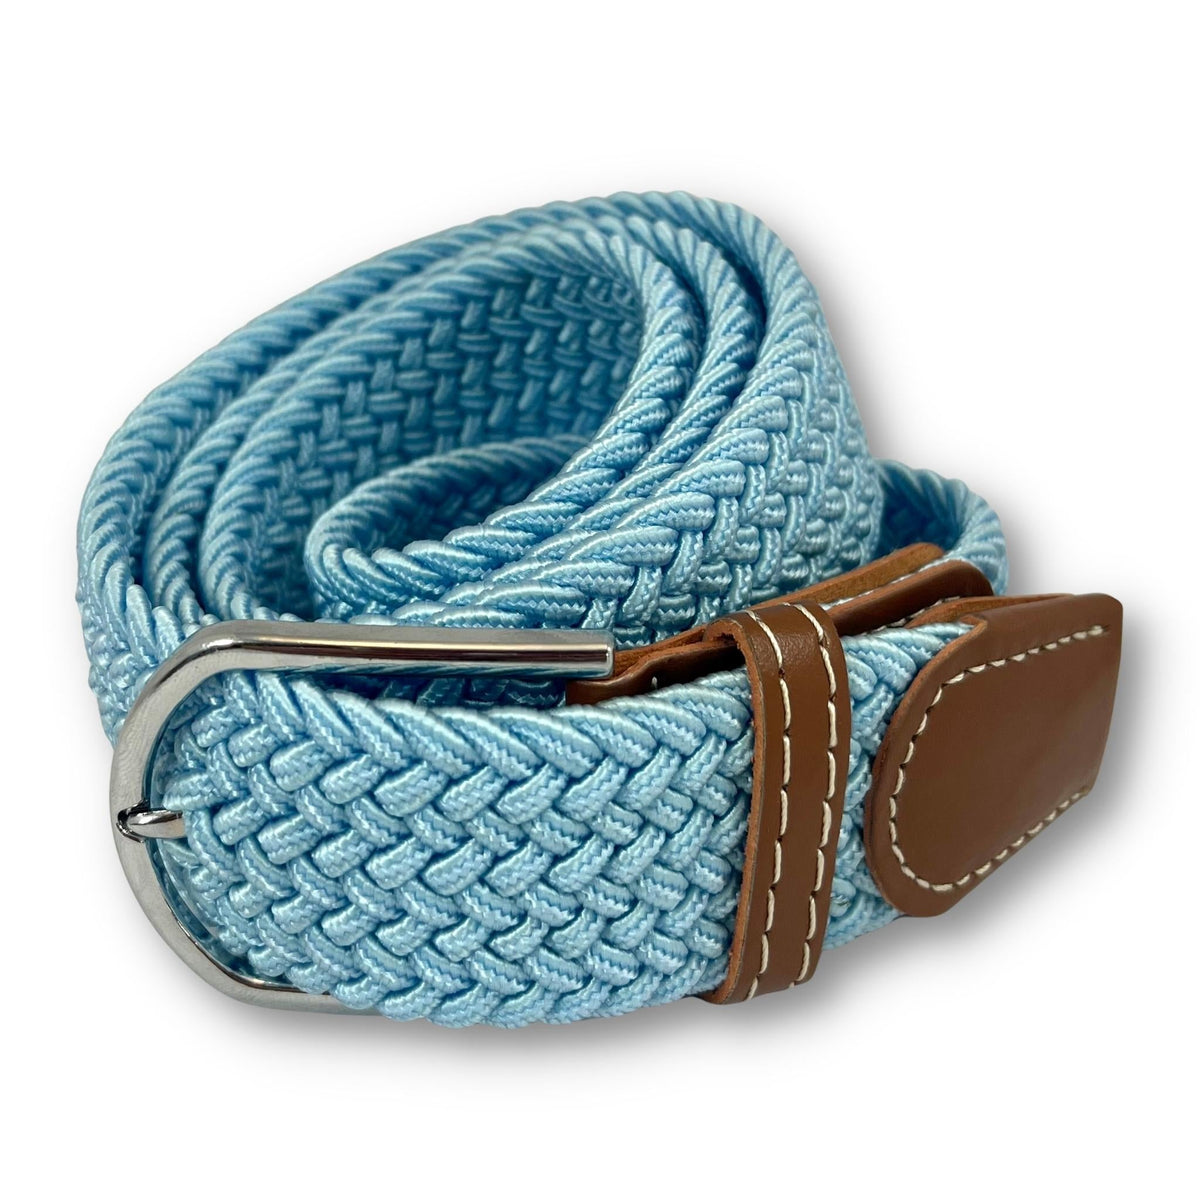 Curled up aqua elastic belt with silver buckle and brown leather ends.